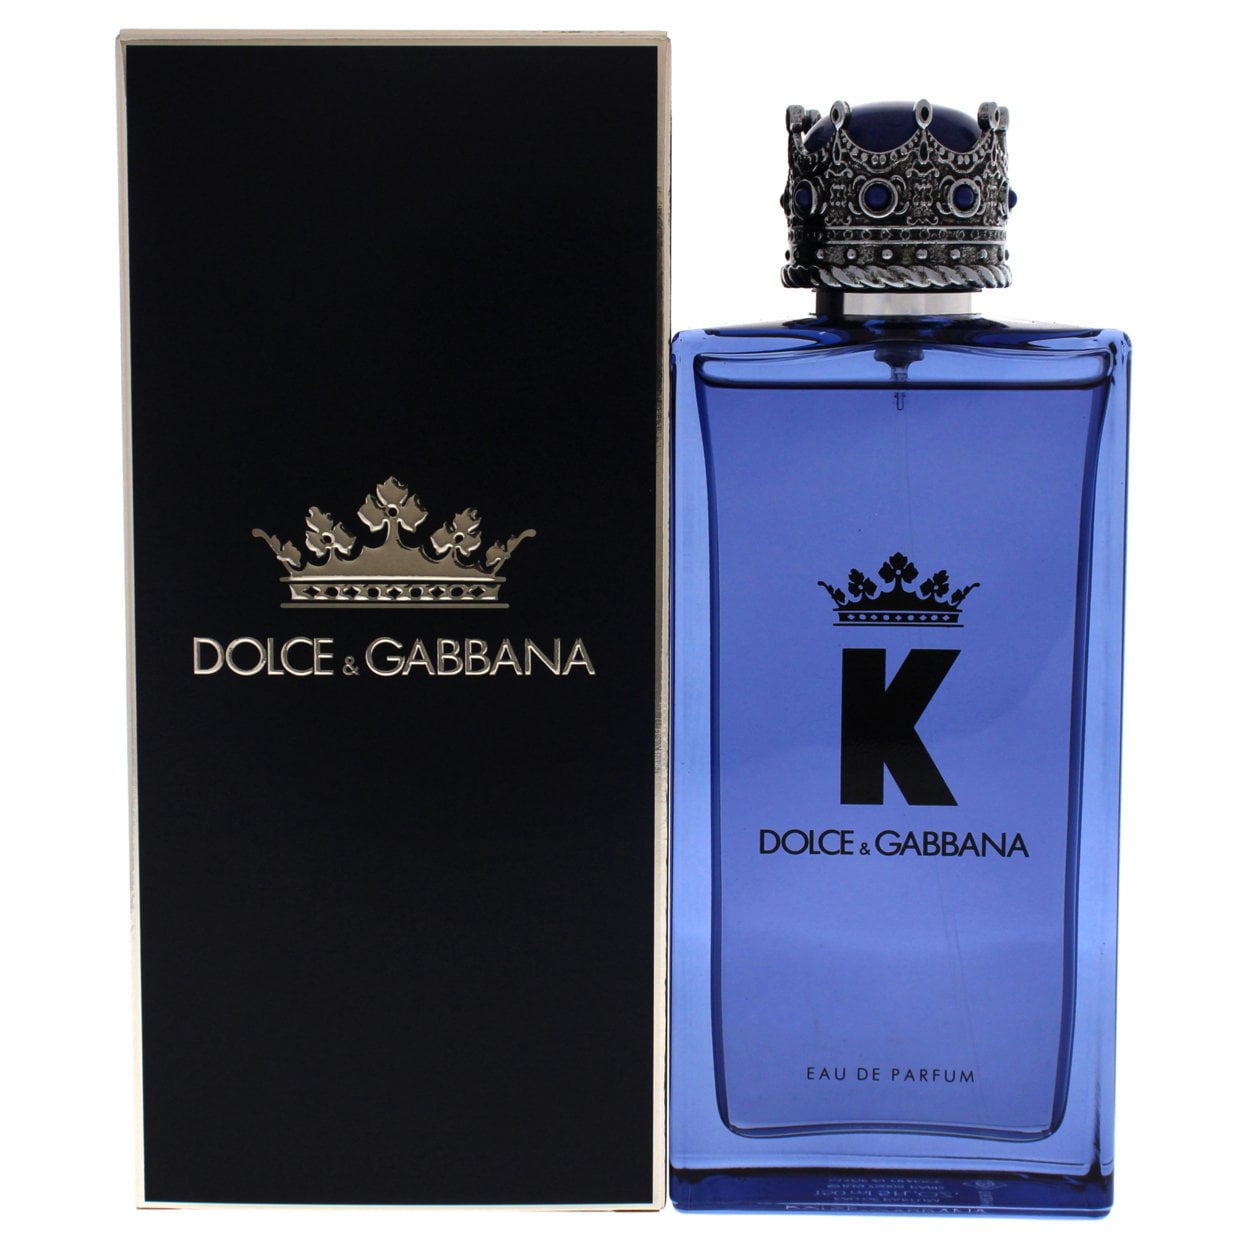 K by Dolce and EDP Men oz 5.0 Spray for - Gabbana